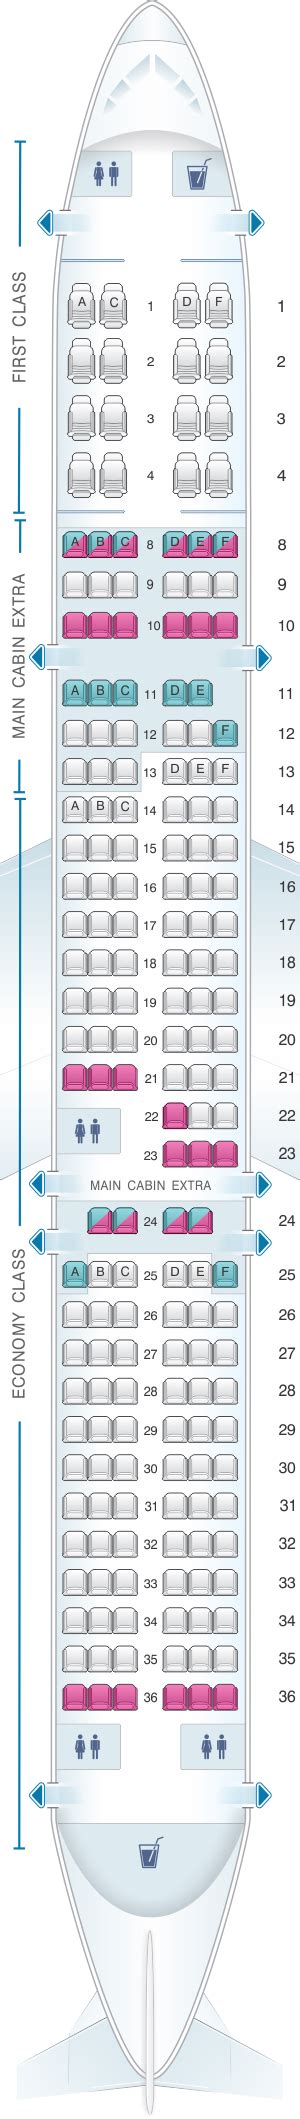 Seat Map American Airlines Airbus A321 181pax | SeatMaestro